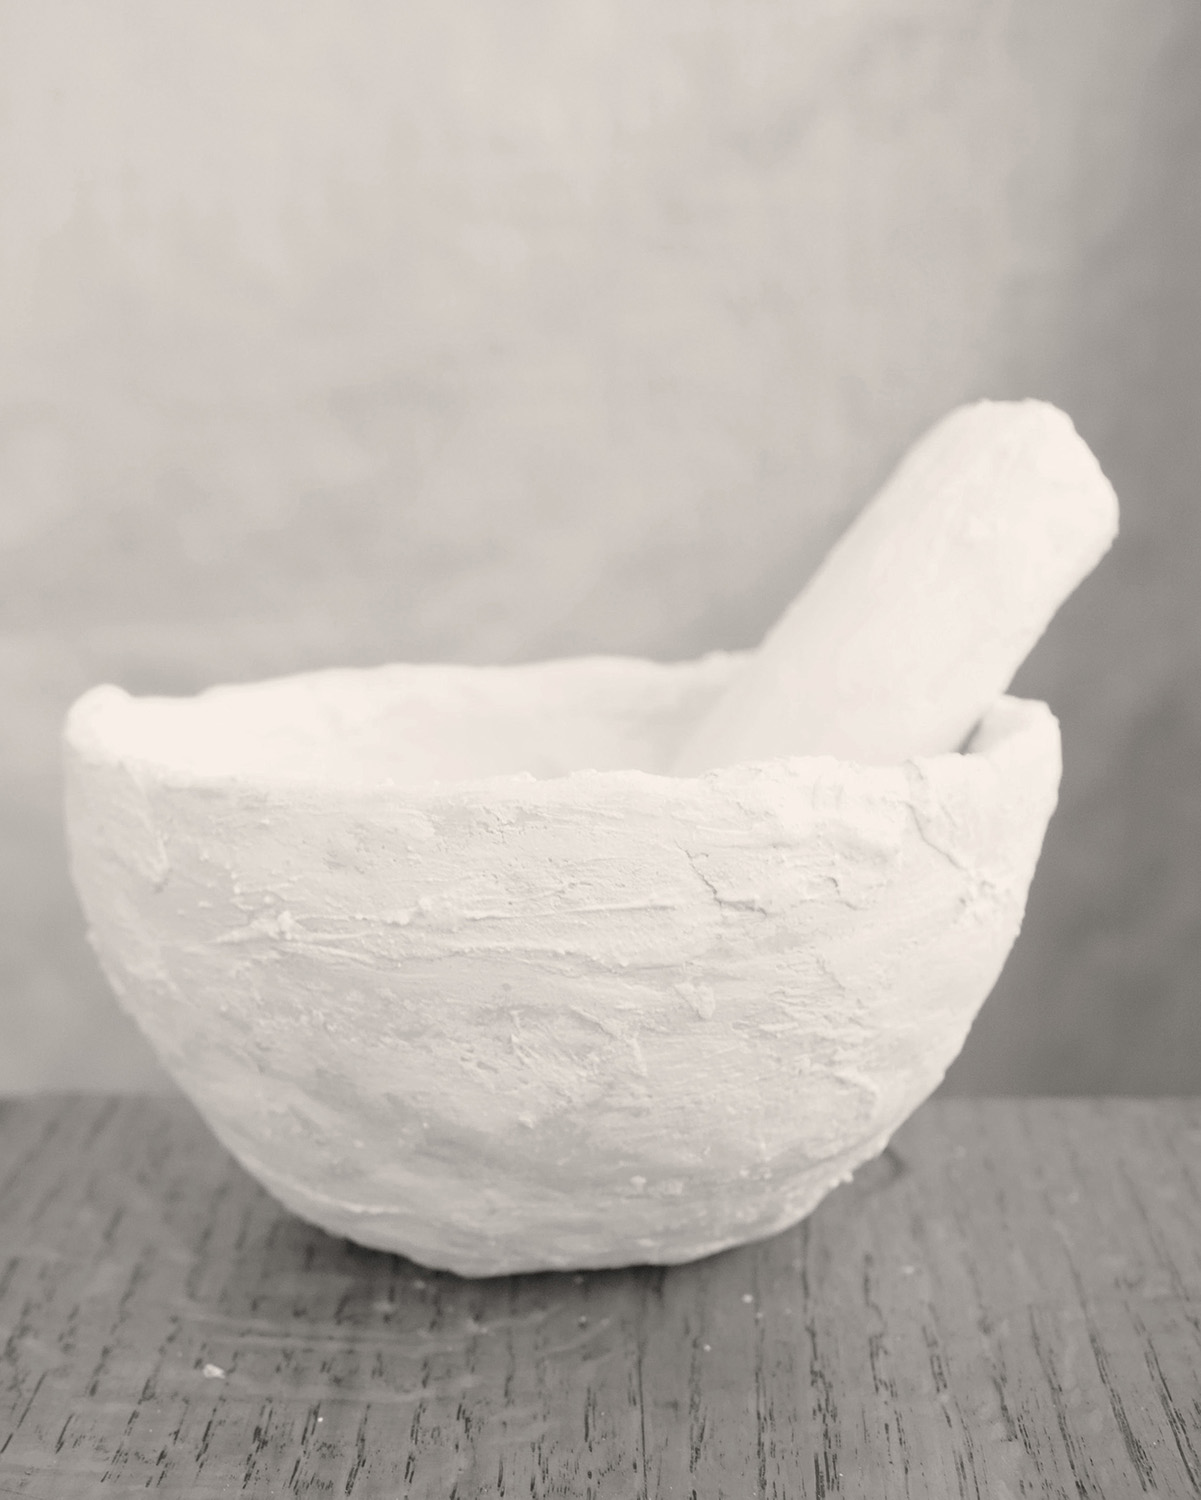 clay pestle and mortar